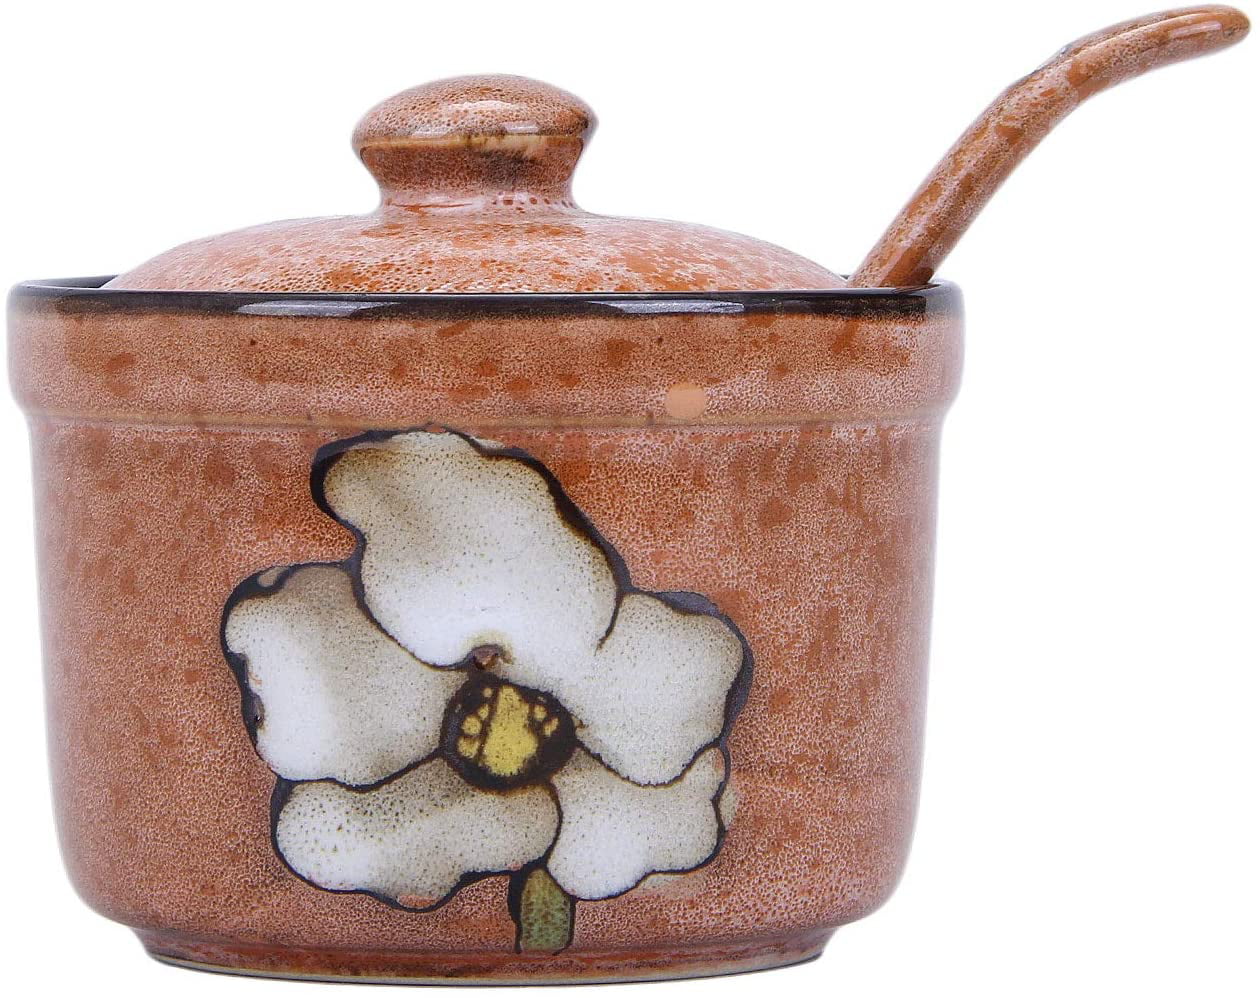 VanEnjoy Retro Hand Painted Flower Ceramic Round Sugar Bowls Spice Containers Porcelain Jar with Spoon Round Condiment 